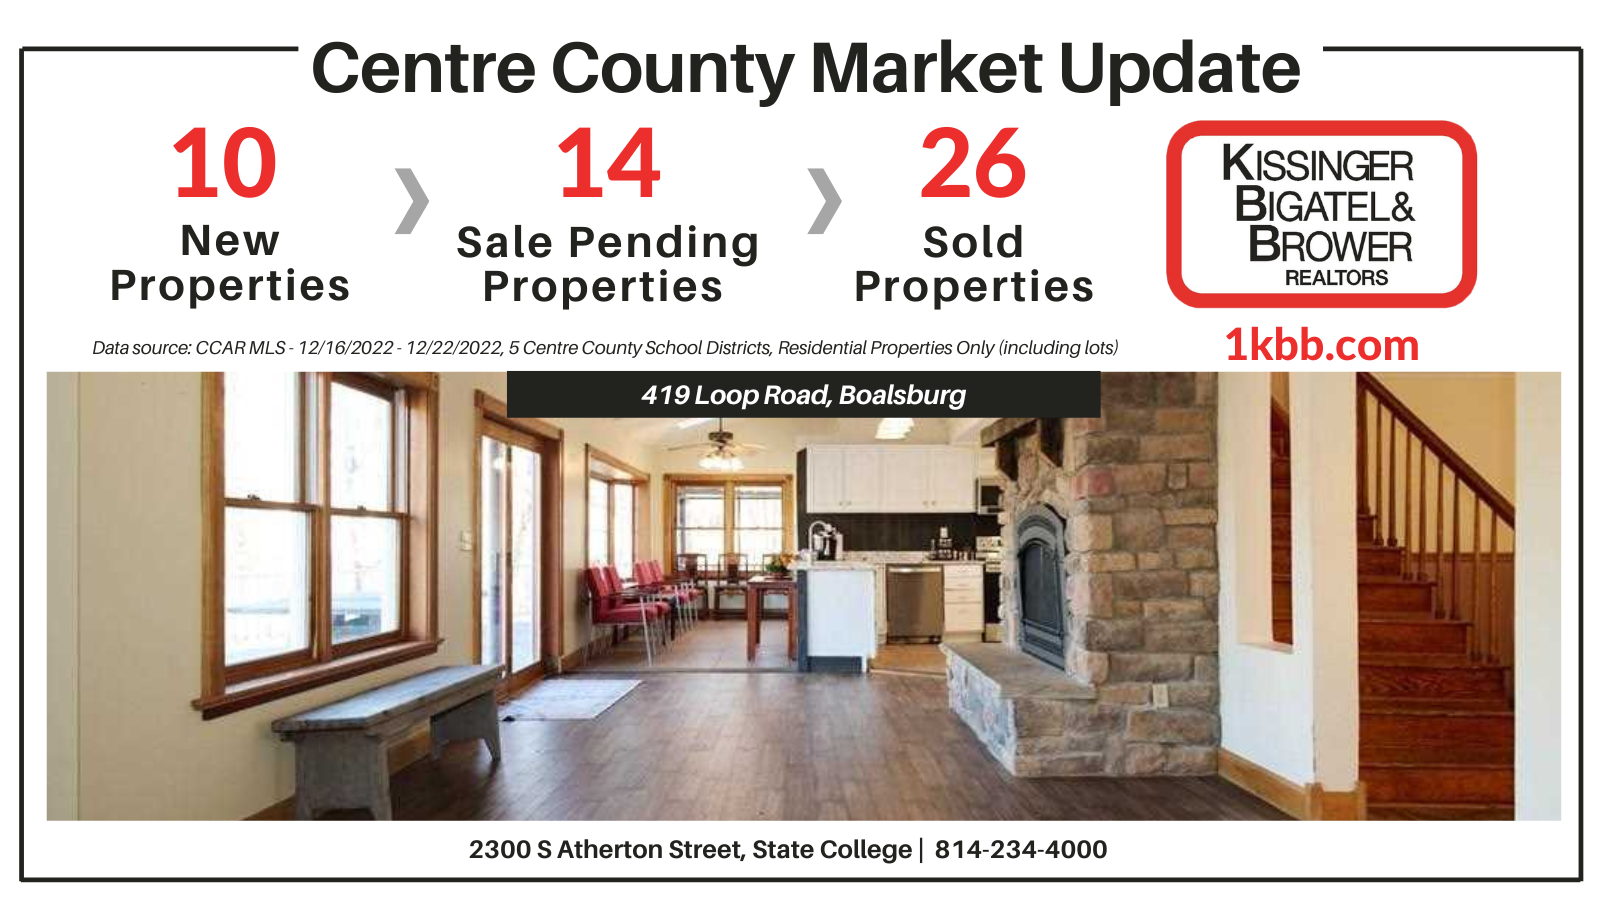 Market Update Report for 12/16-12/22/2022 in Centre County, PA